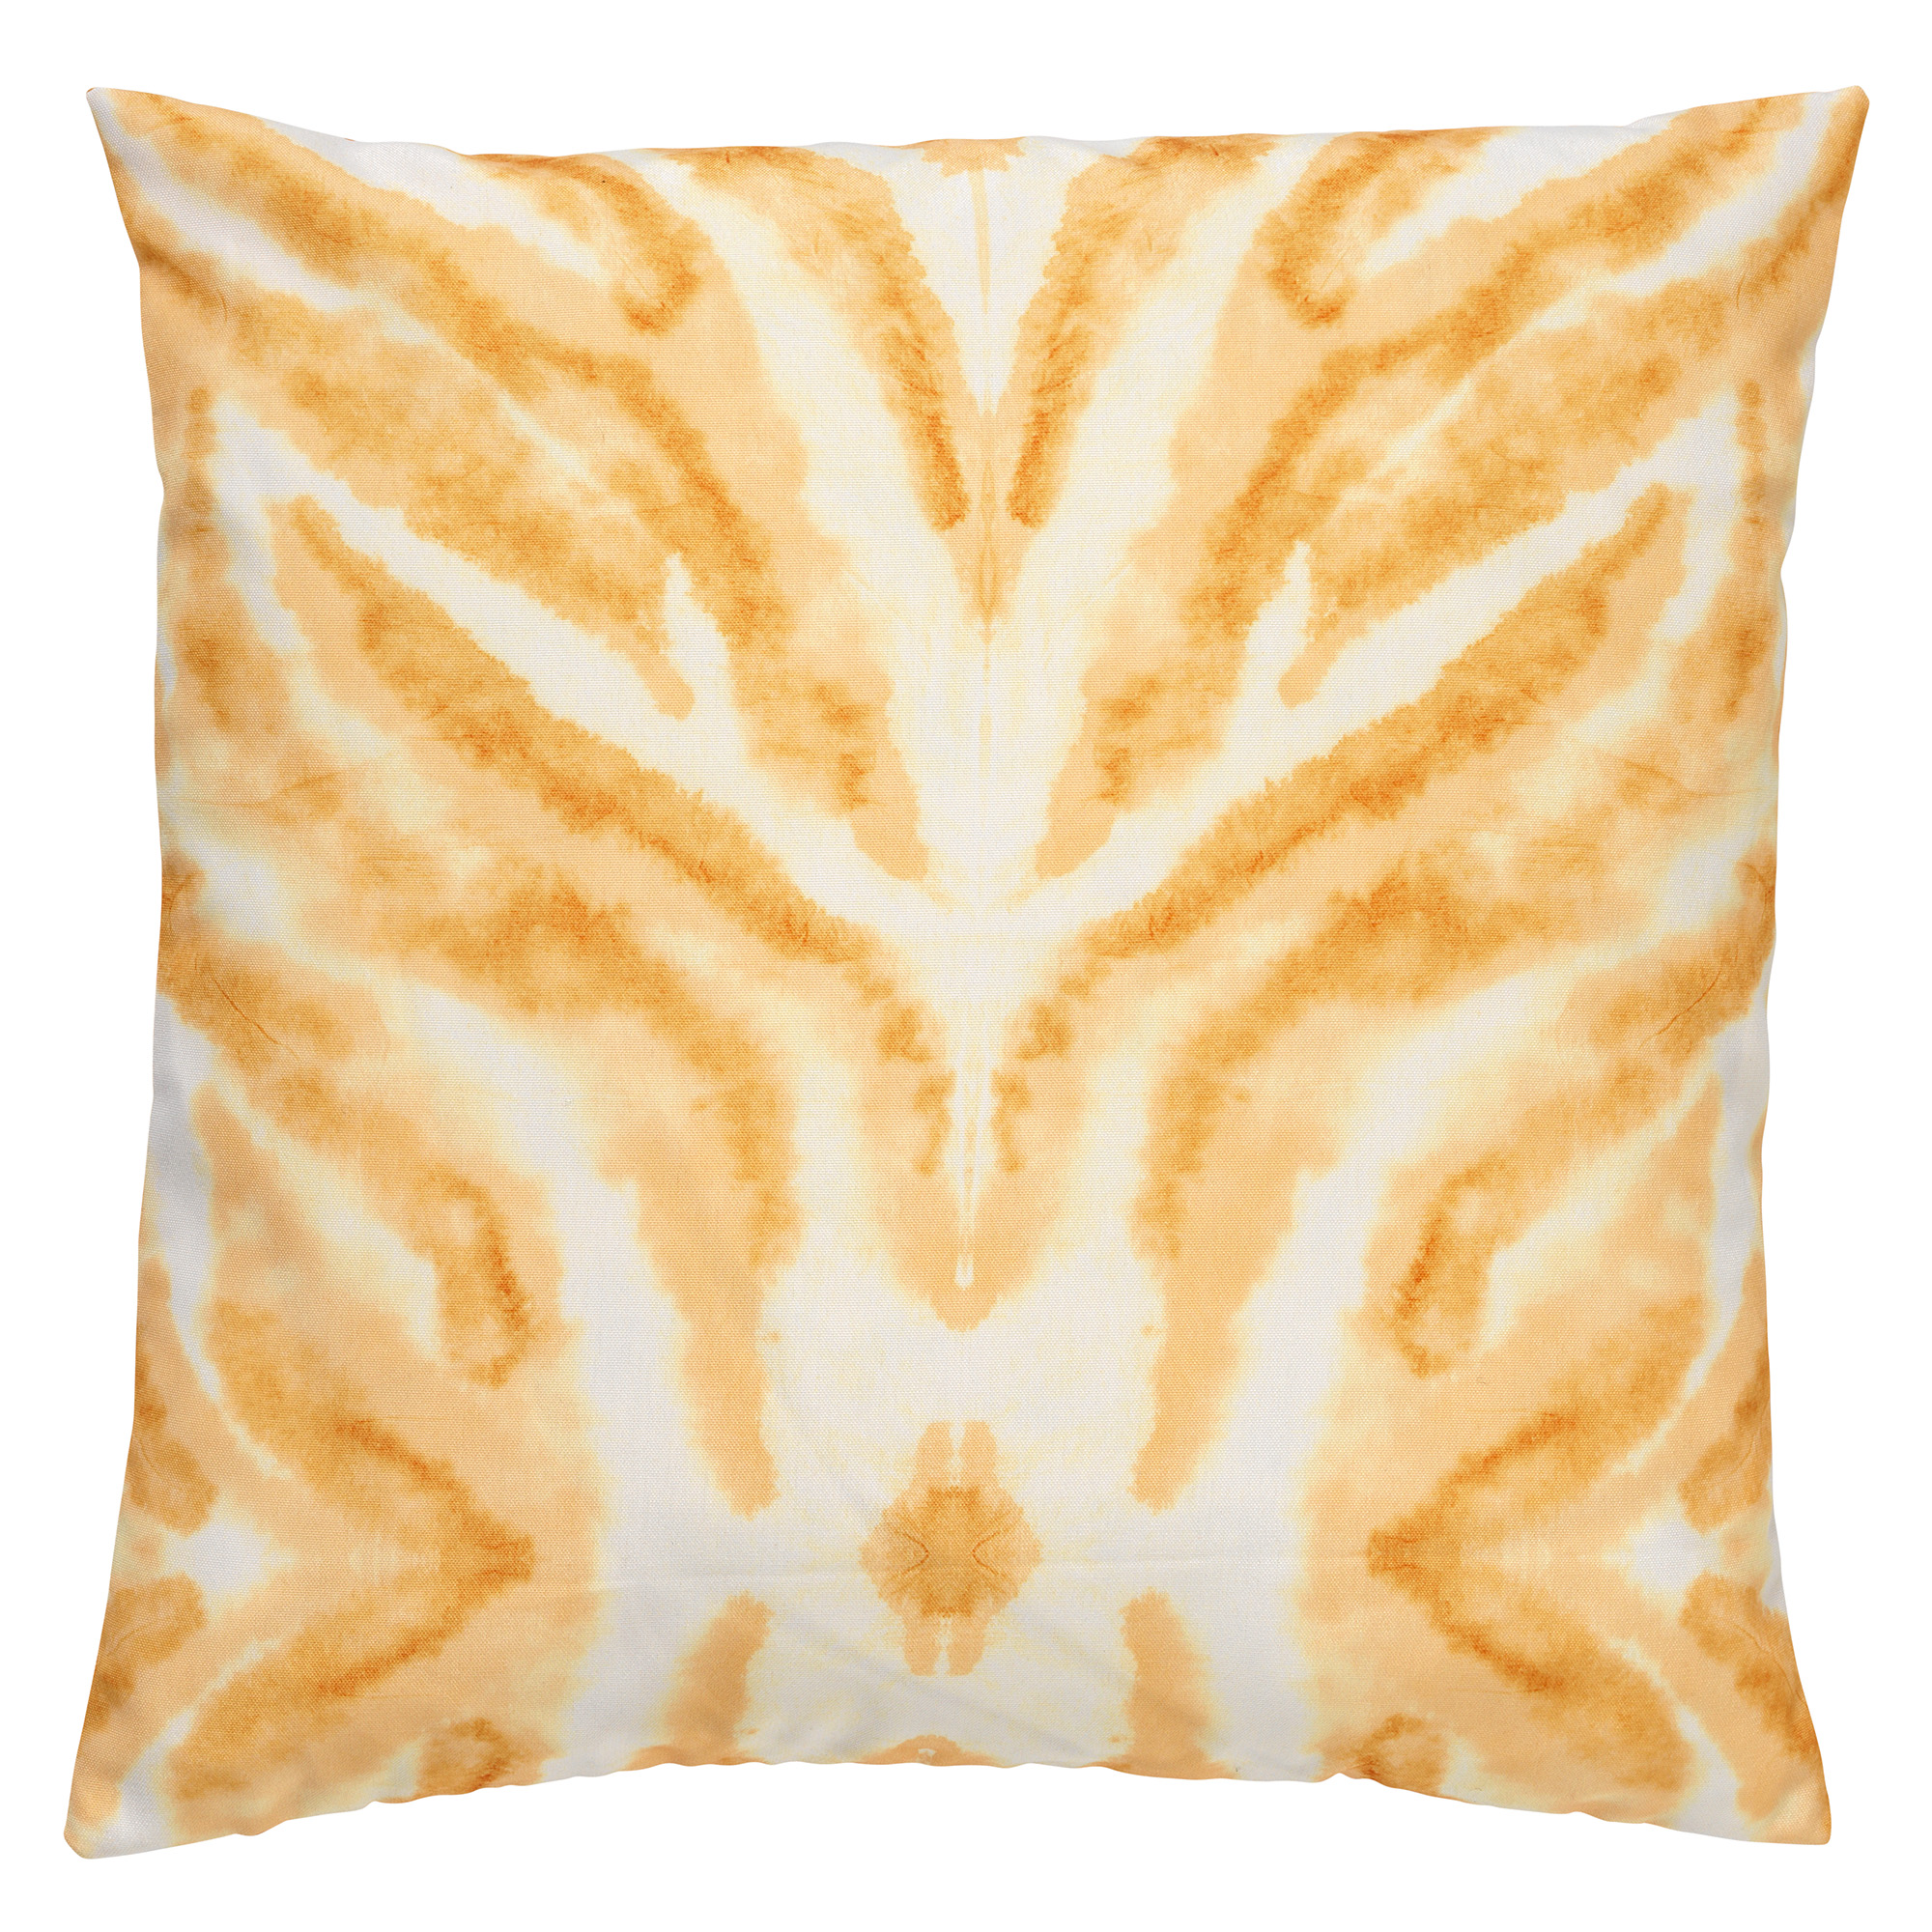 Cushion Sangro 45x45 cm Golden Glow - water-repellent and UV-resistant